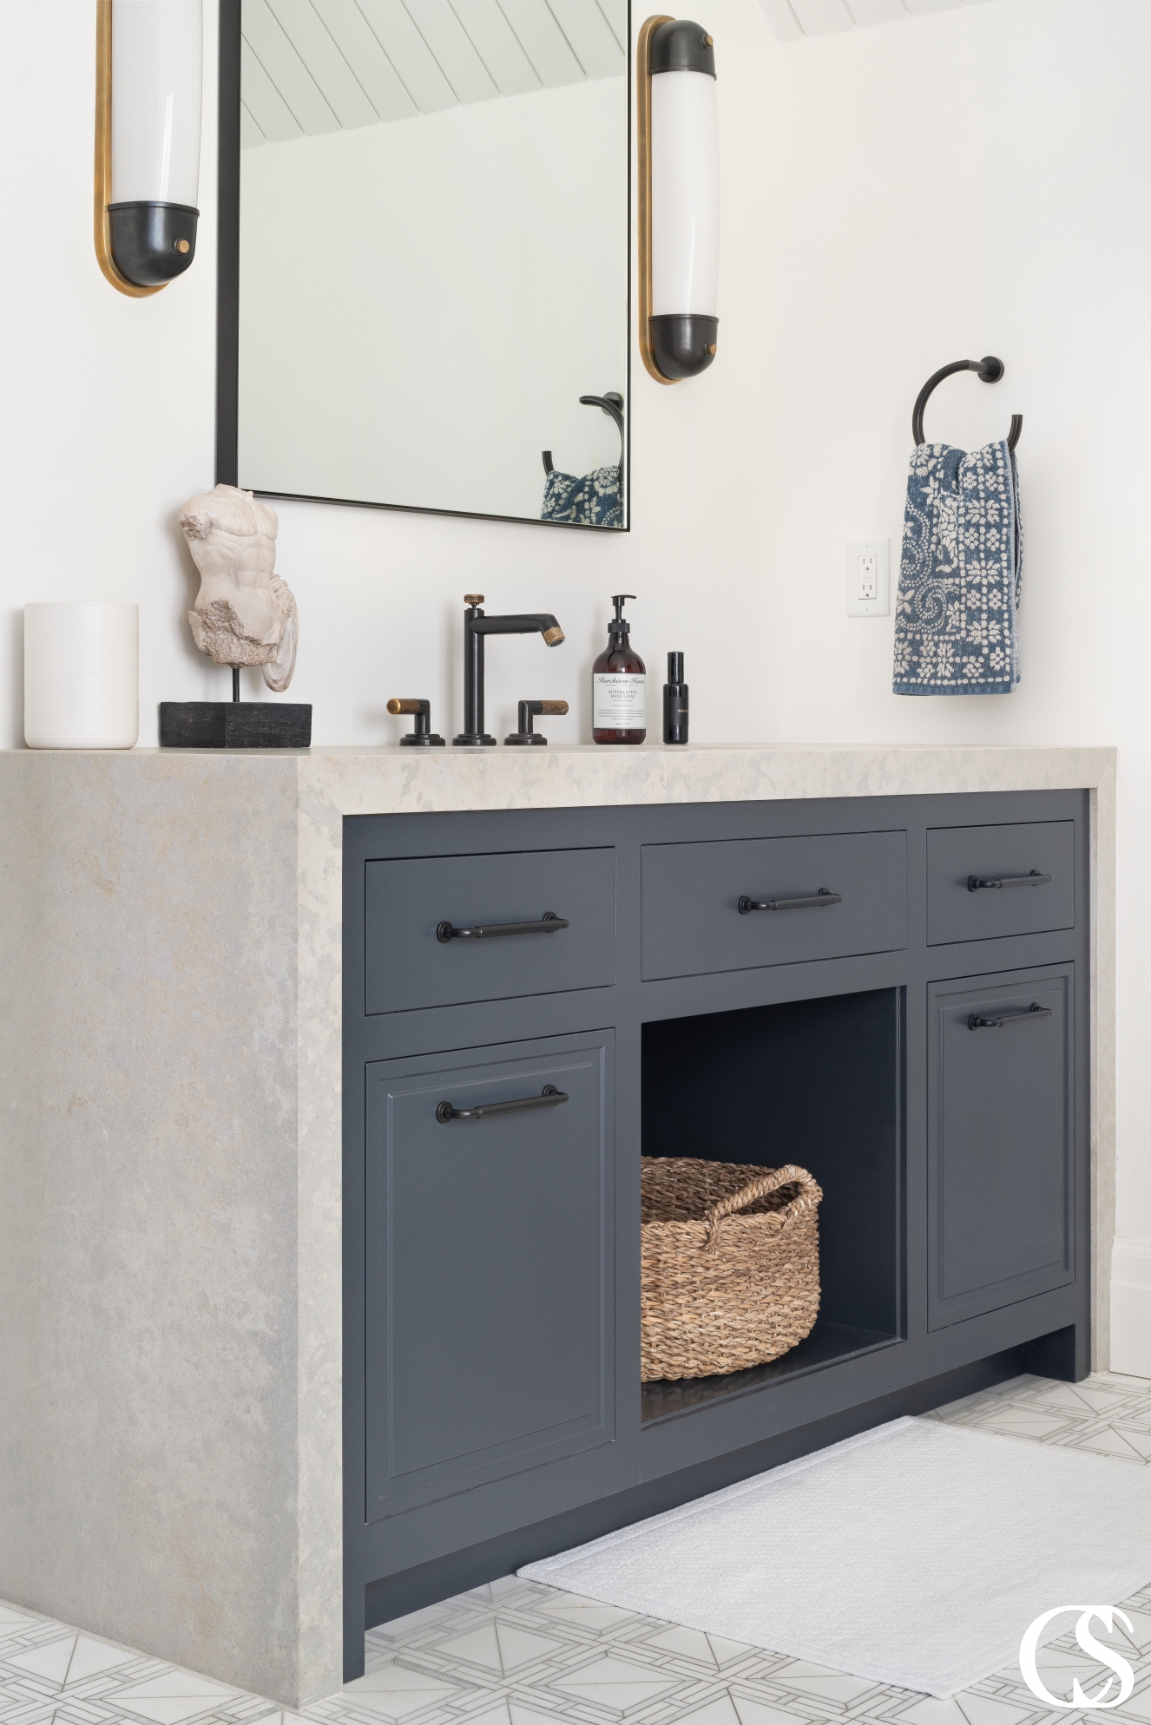 Functional and stylish custom bathroom cabinets, designed to maximize storage while fitting seamlessly into the overall design of the room. The cabinet features a mix of open shelving and closed storage options with a natural wood finish